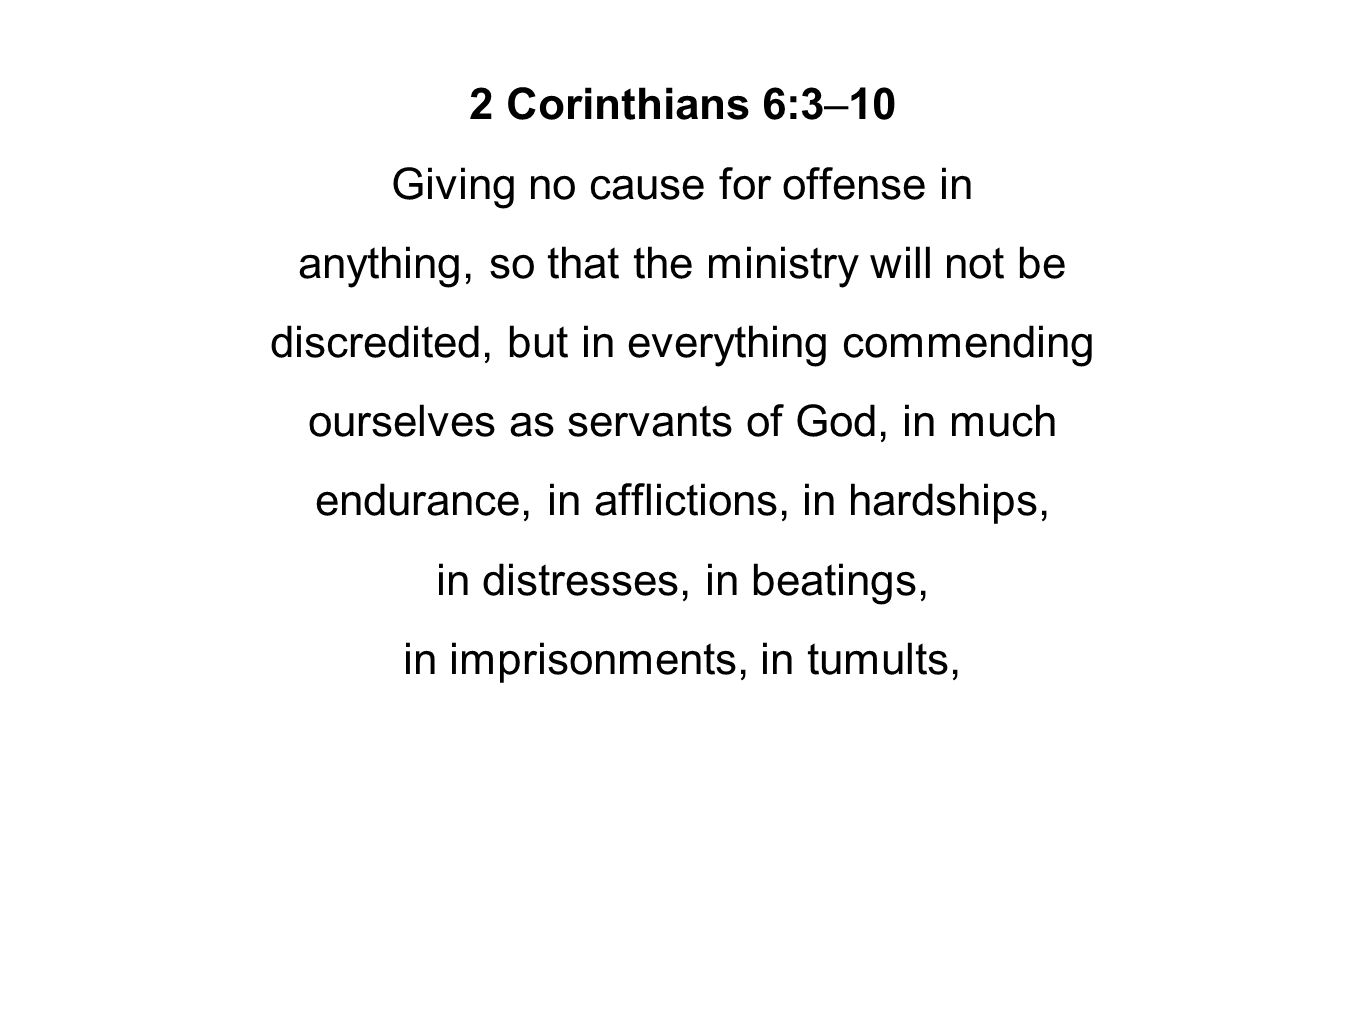 2 Corinthians 6:3–10 Giving no cause for offense in anything, so that the ministry will not be discredited, but in everything commending ourselves as servants of God, in much endurance, in afflictions, in hardships, in distresses, in beatings, in imprisonments, in tumults,